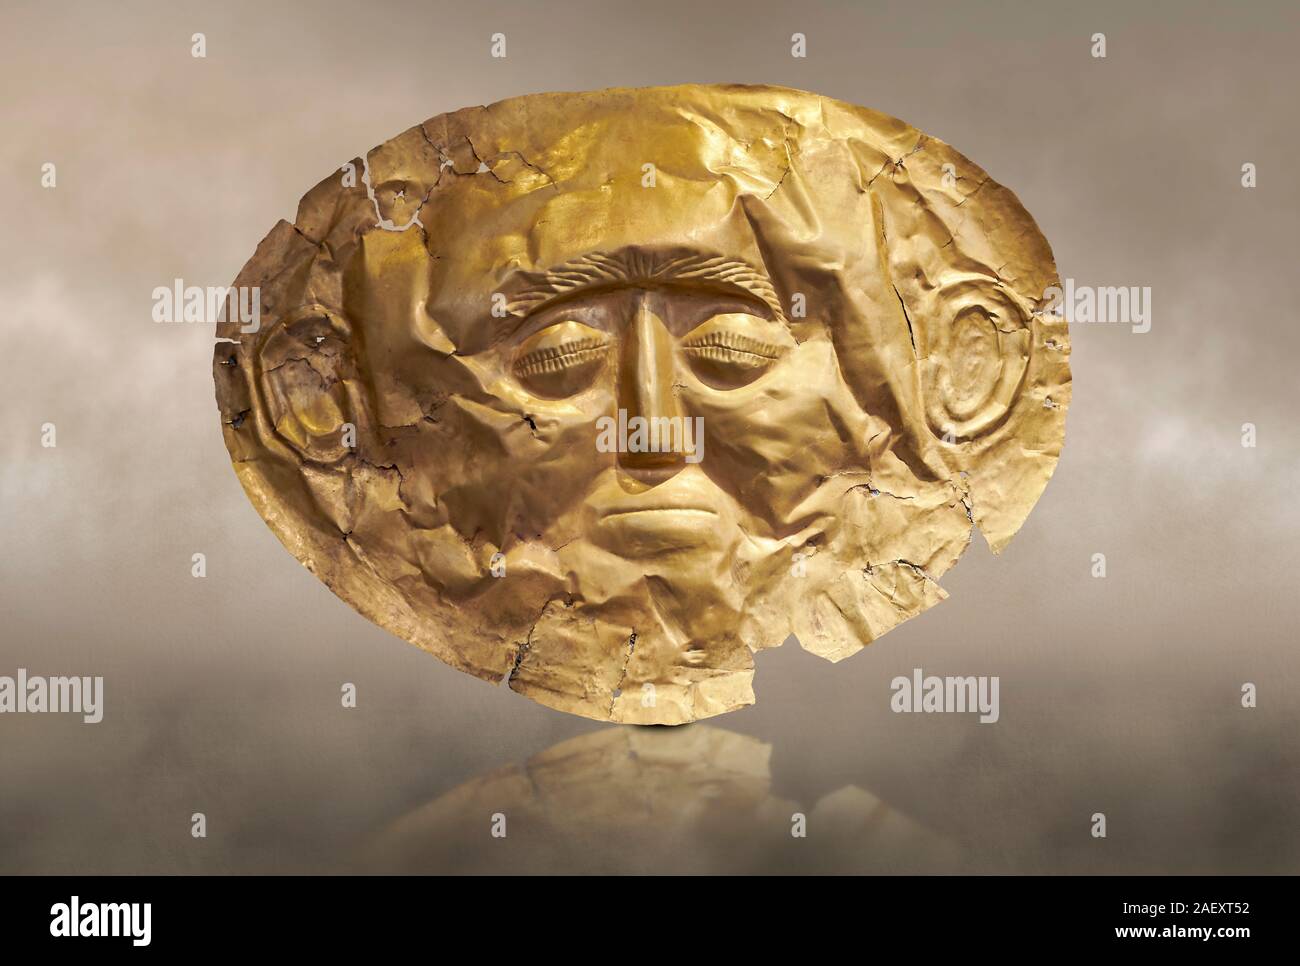 Mycenaean gold death mask, Grave Cicle A, Mycenae, Greece. National Archaeological Museum of Athens.   This death mask is typical of the other Mycenae Stock Photo